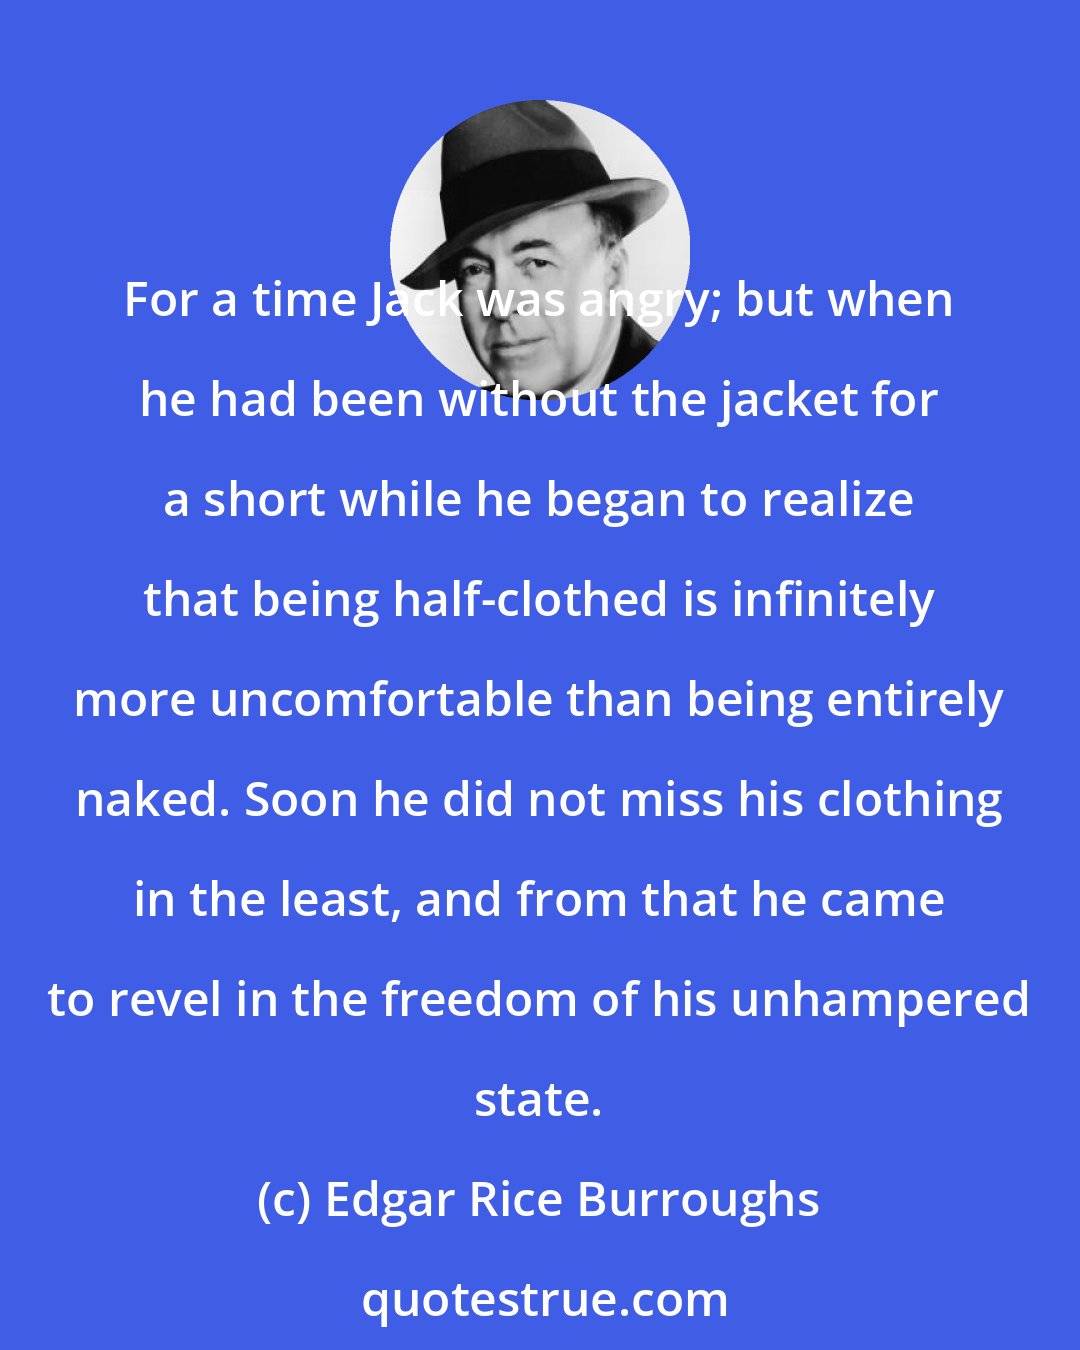 Edgar Rice Burroughs: For a time Jack was angry; but when he had been without the jacket for a short while he began to realize that being half-clothed is infinitely more uncomfortable than being entirely naked. Soon he did not miss his clothing in the least, and from that he came to revel in the freedom of his unhampered state.